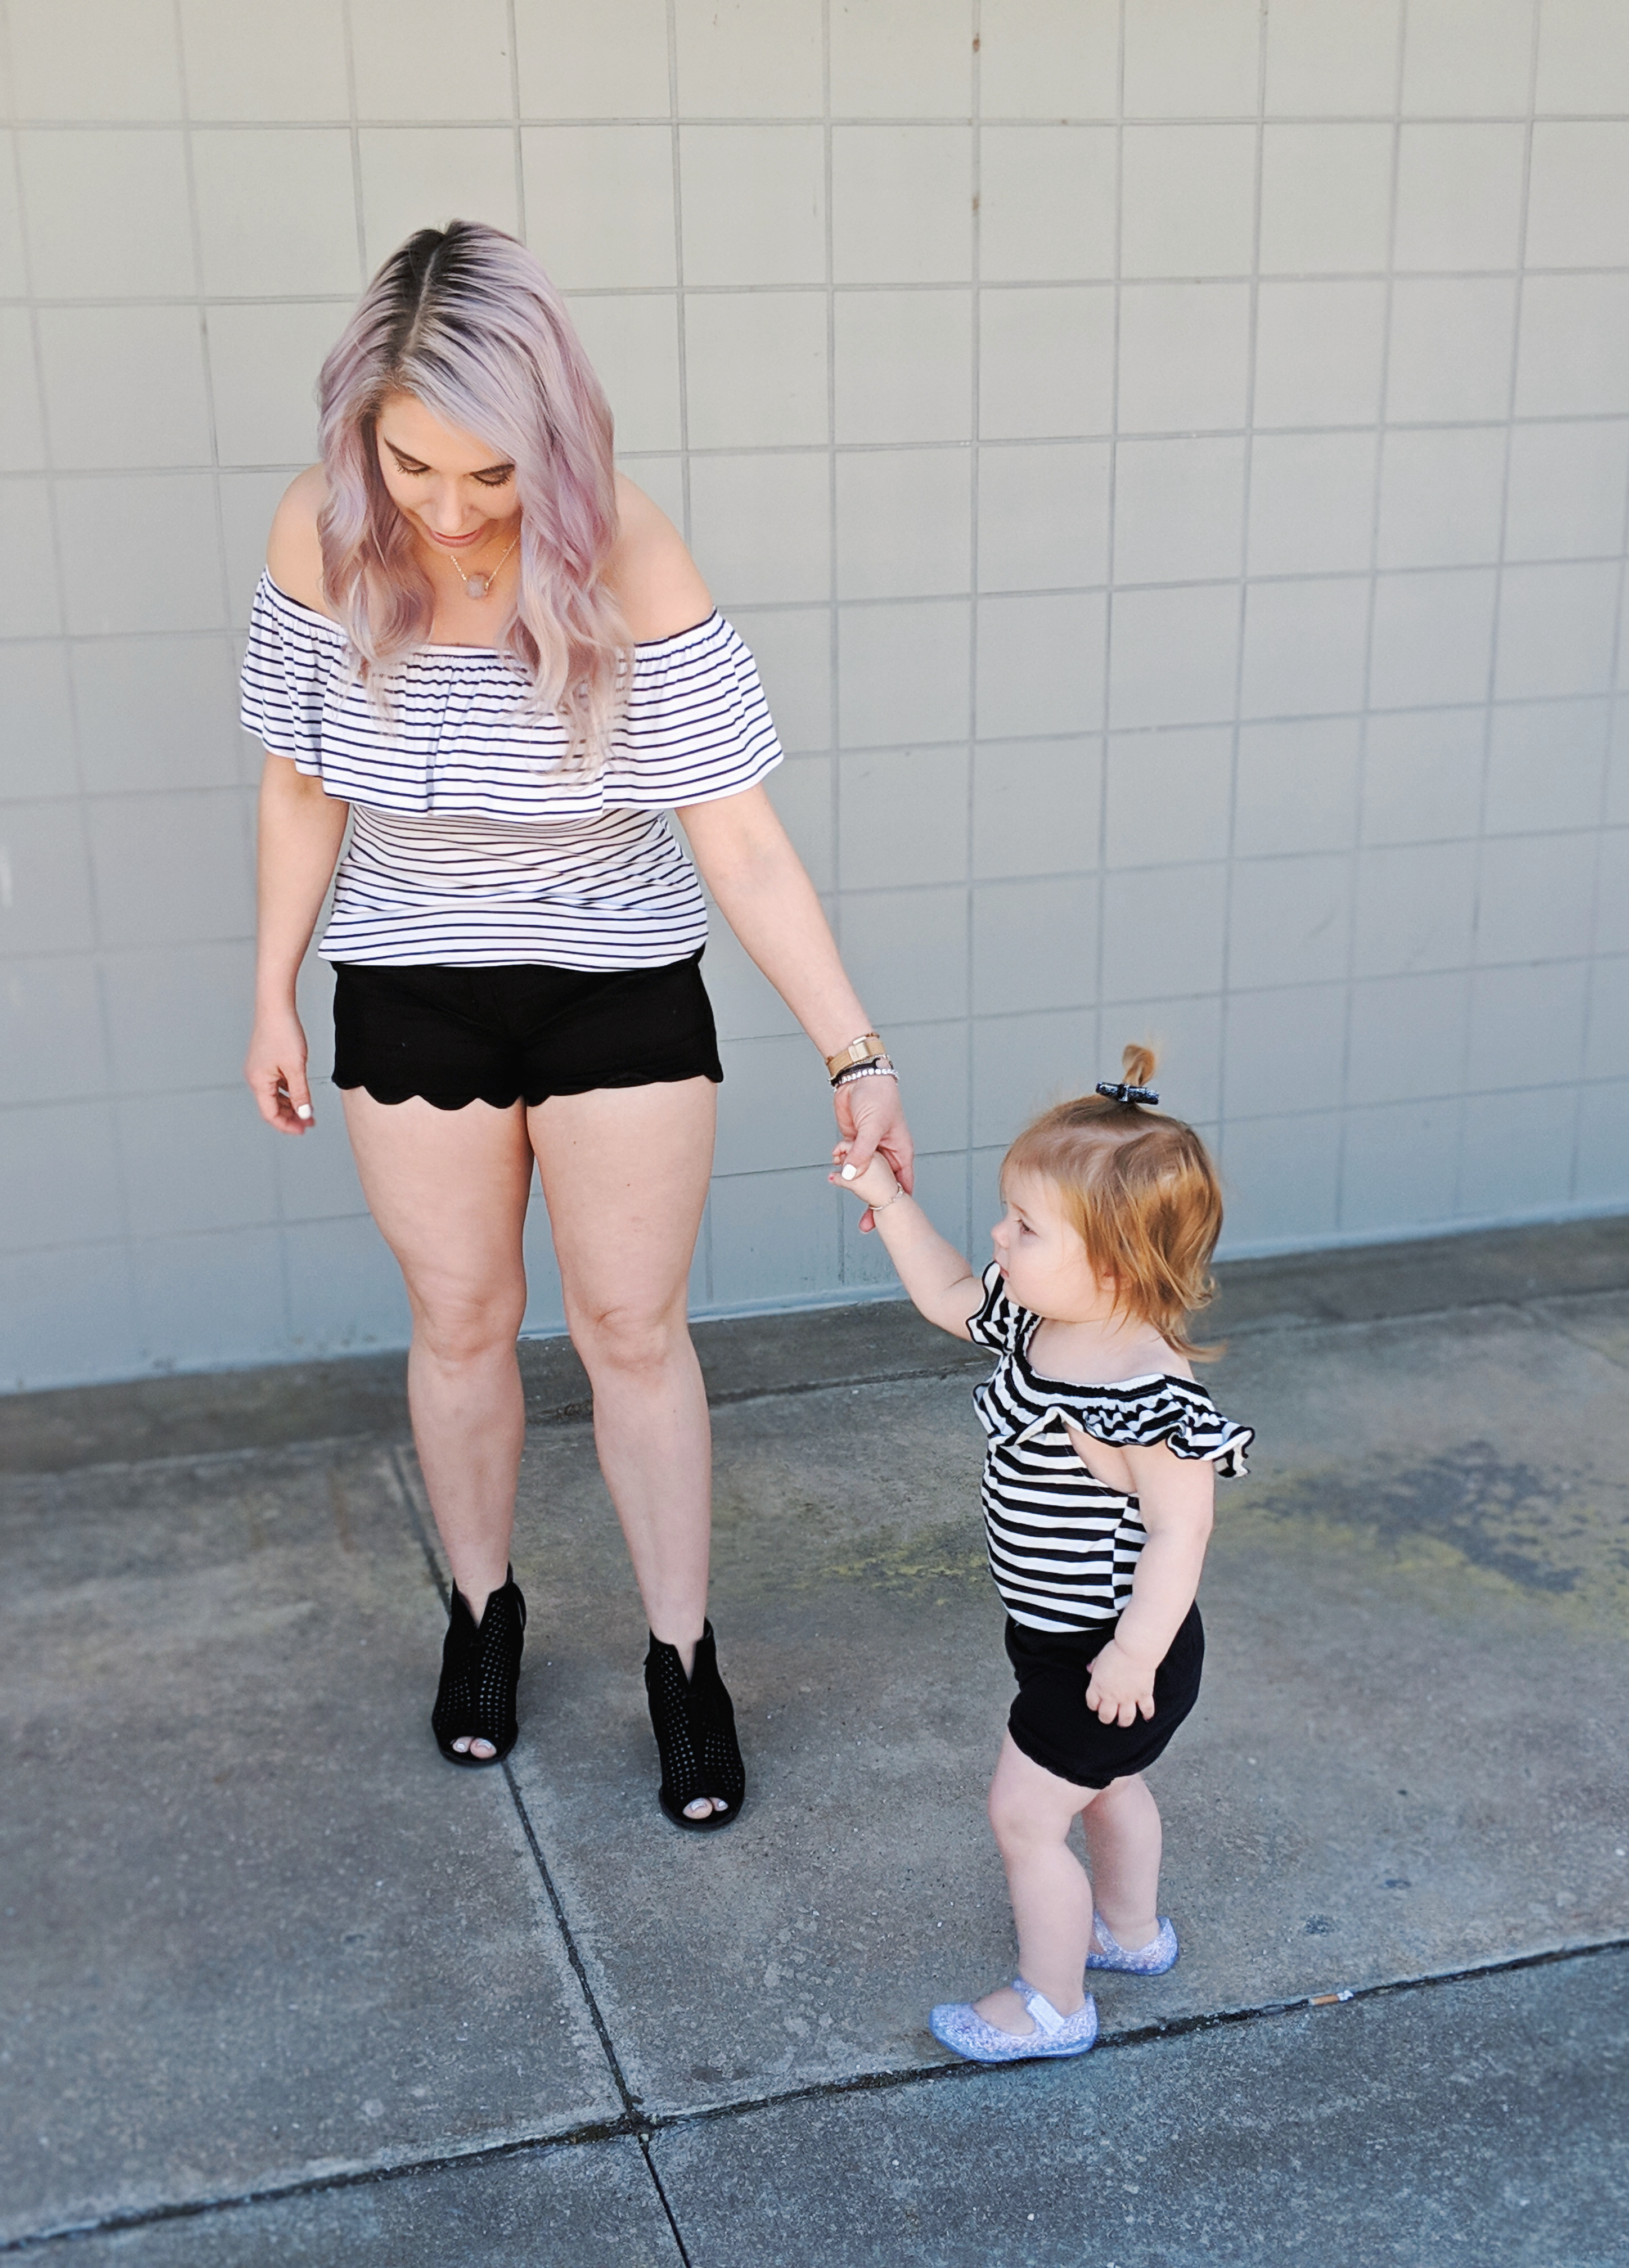 Affordable Mommy and Me Twinning Outfit Ideas: Matching outfits for mom and daughter that you can create with items already in your closets! How to get in on the trend of matching your kids affordably! Cute Mommy and Me twinning outfits 2019. #girlmom #mommyandme #twinning